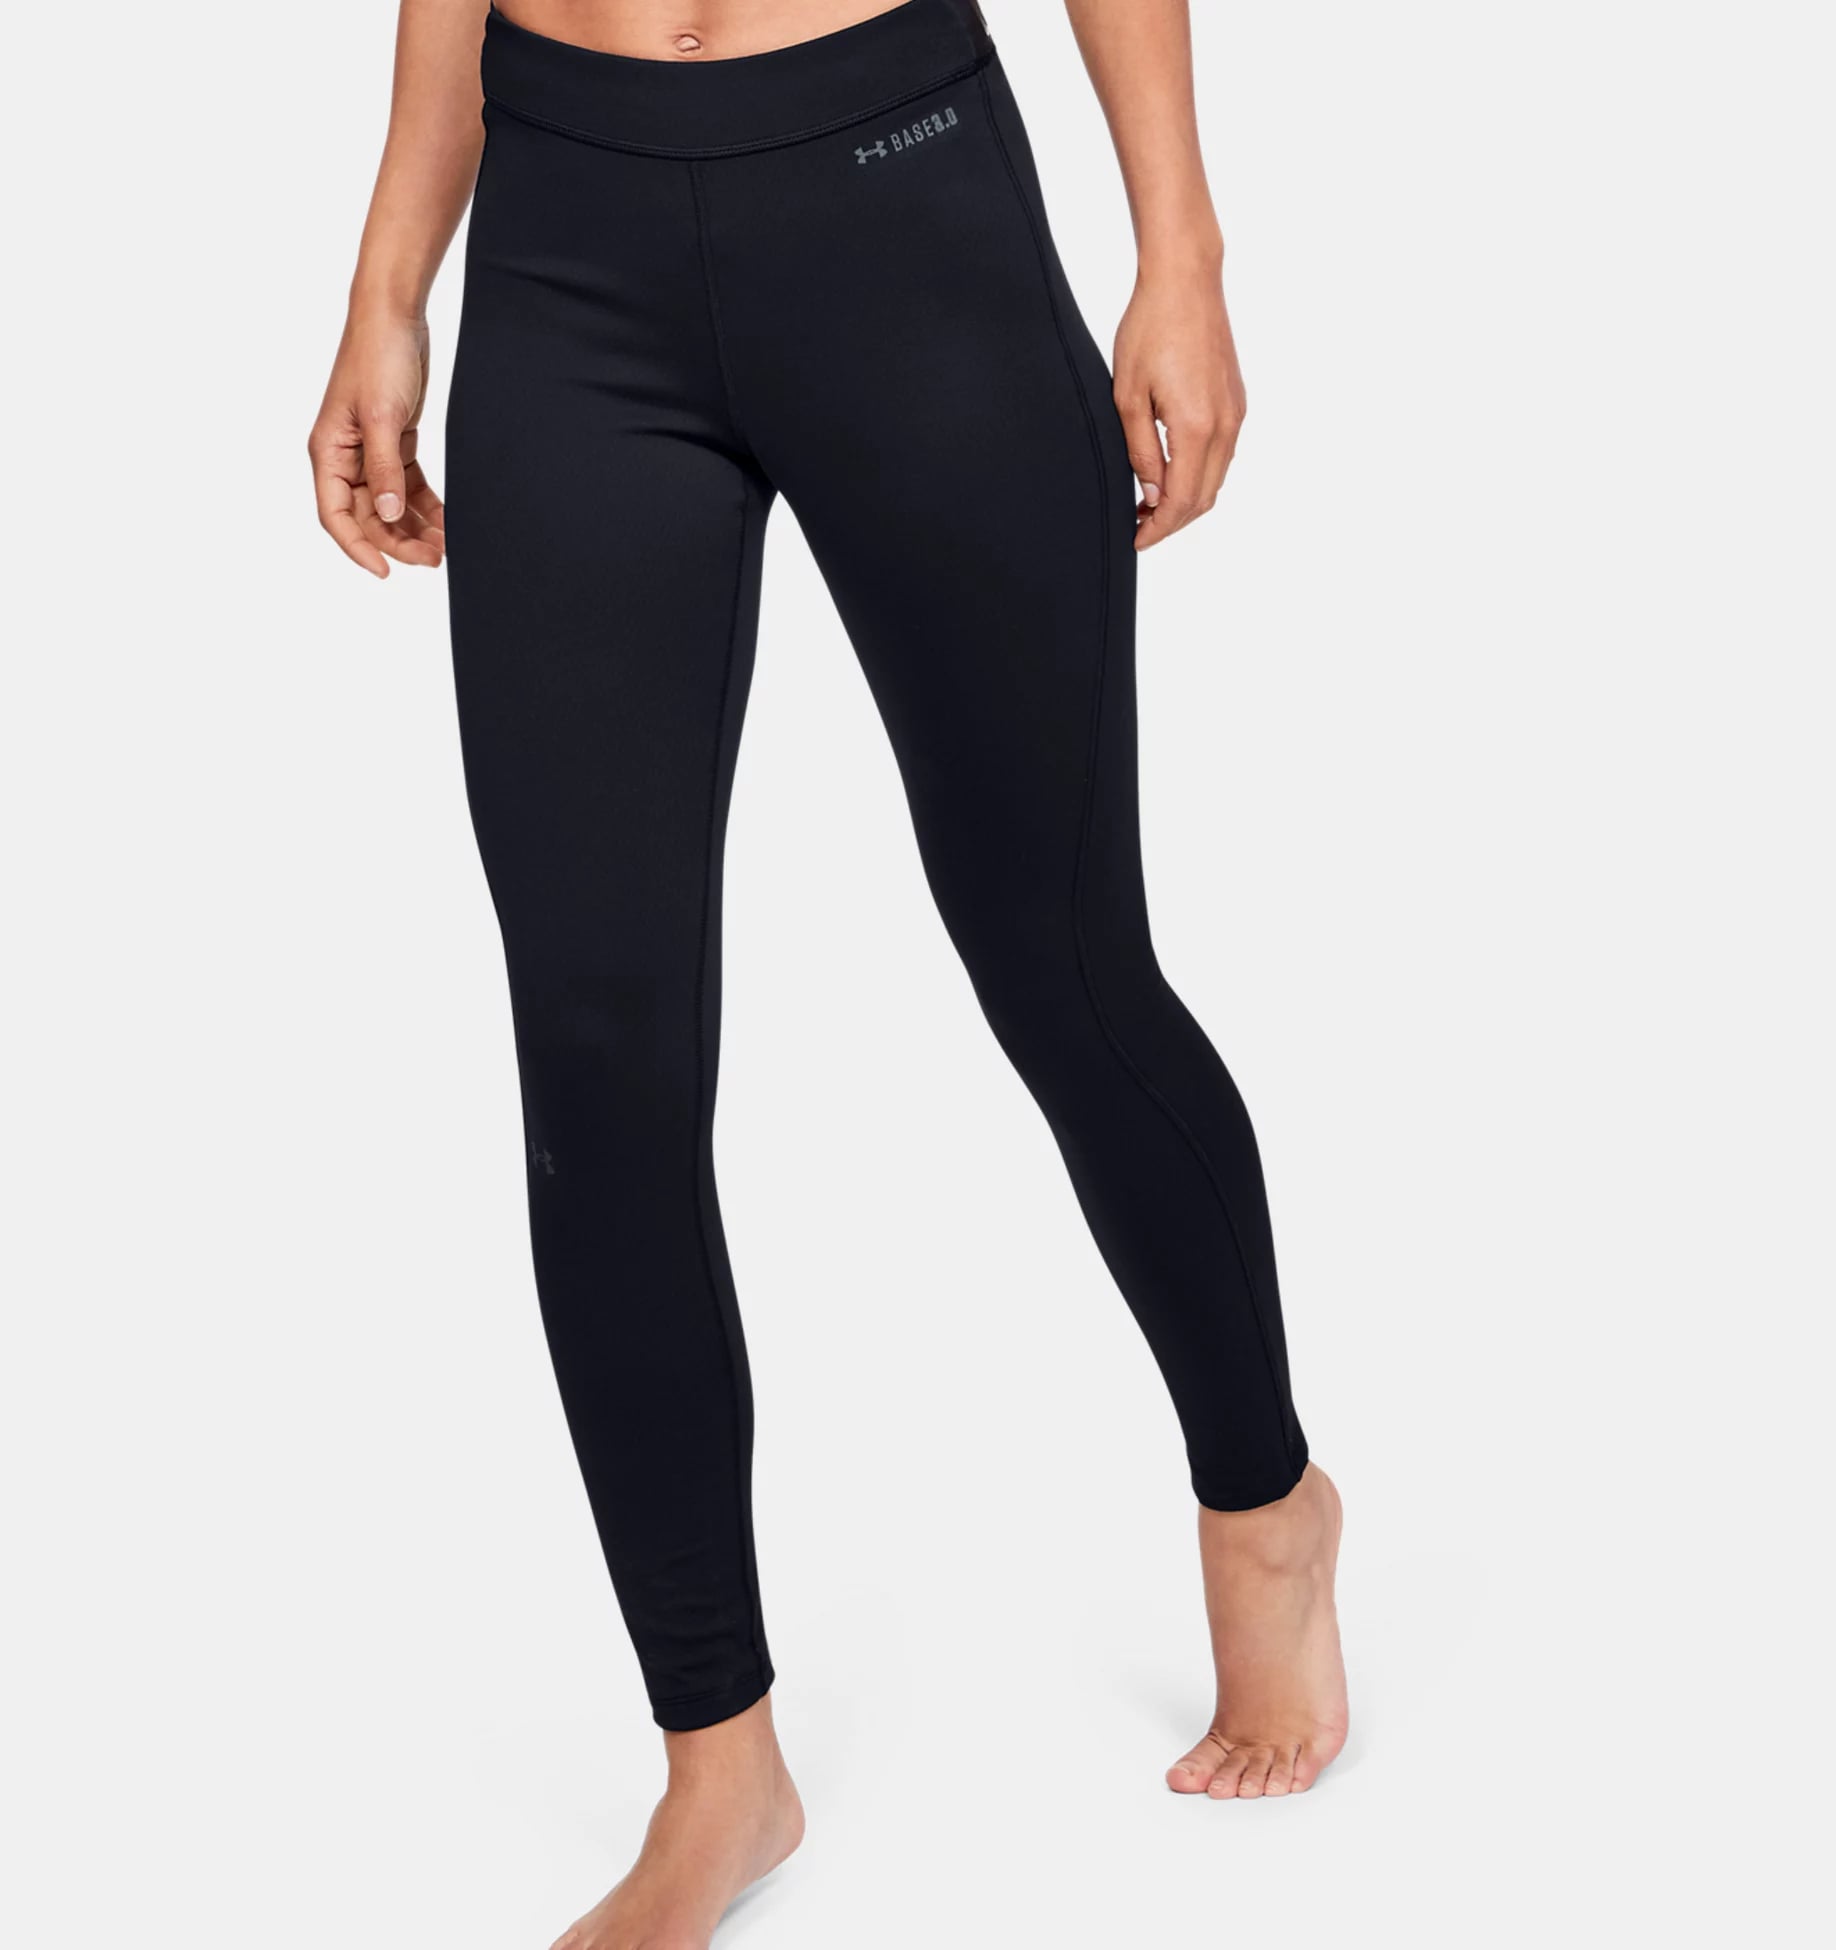 NEW UNDER ARMOUR LEGGING TRY ON REVIEW / HEATGEAR